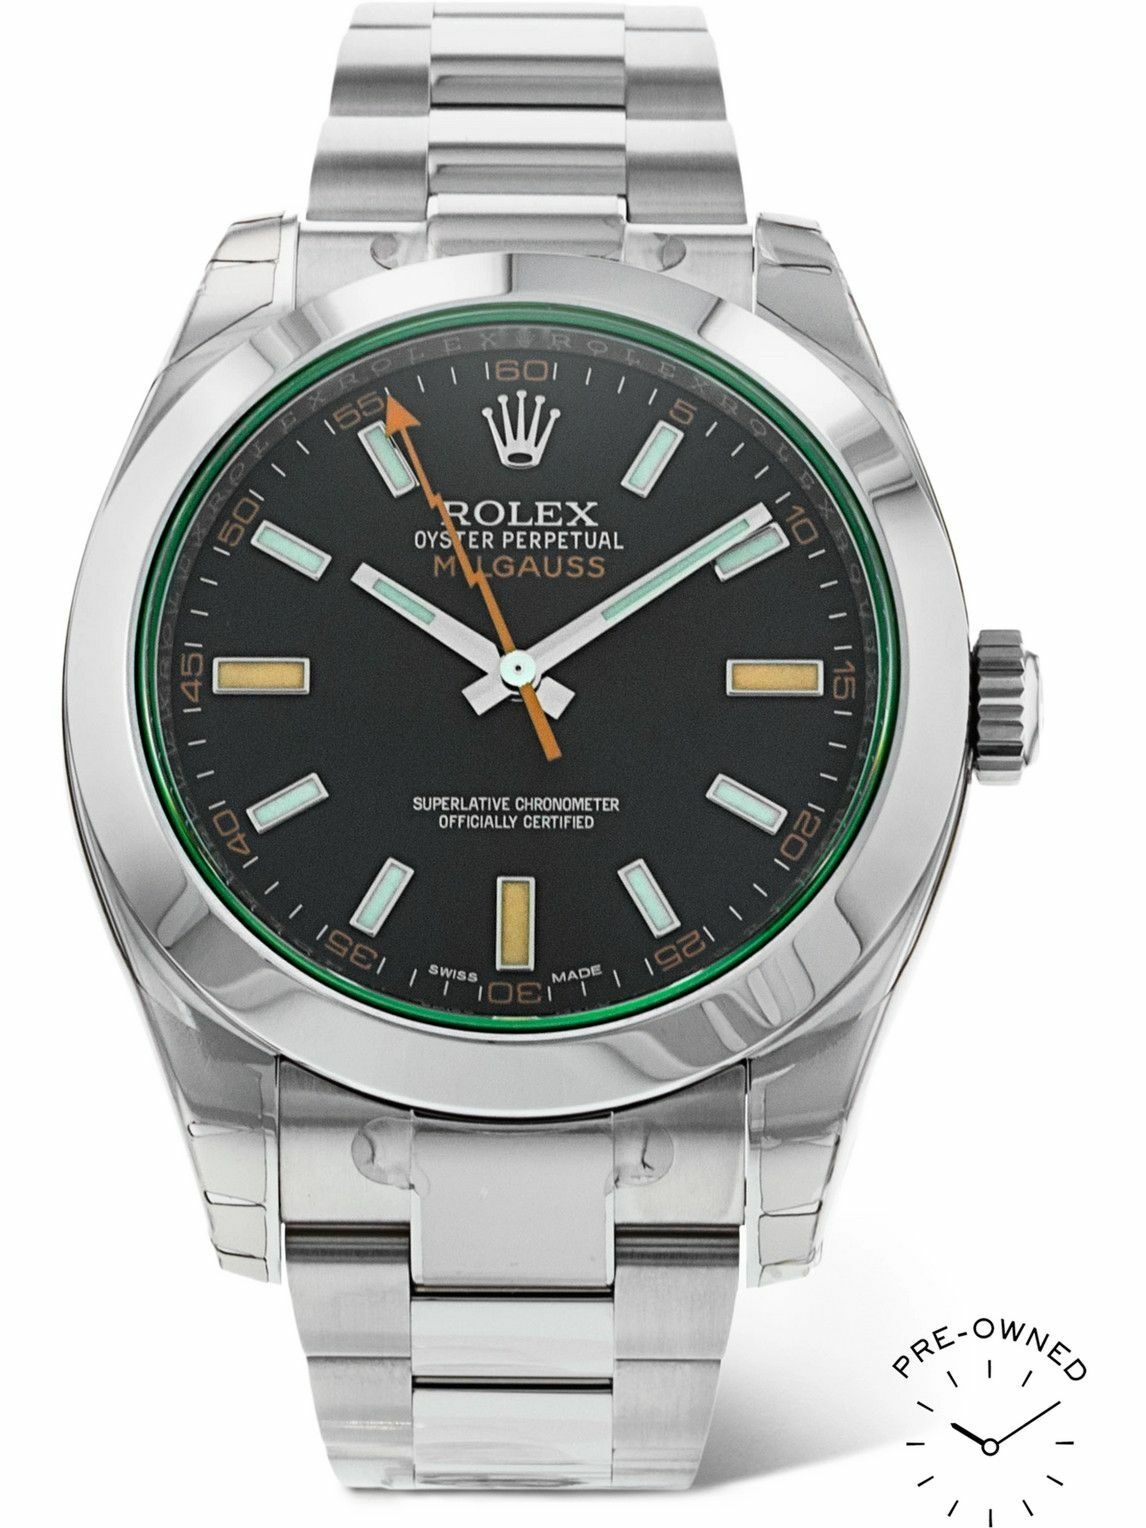 ROLEX - Pre-Owned 2016 Milgauss Automatic 40mm Oystersteel Watch, Ref. No. 116400 GV